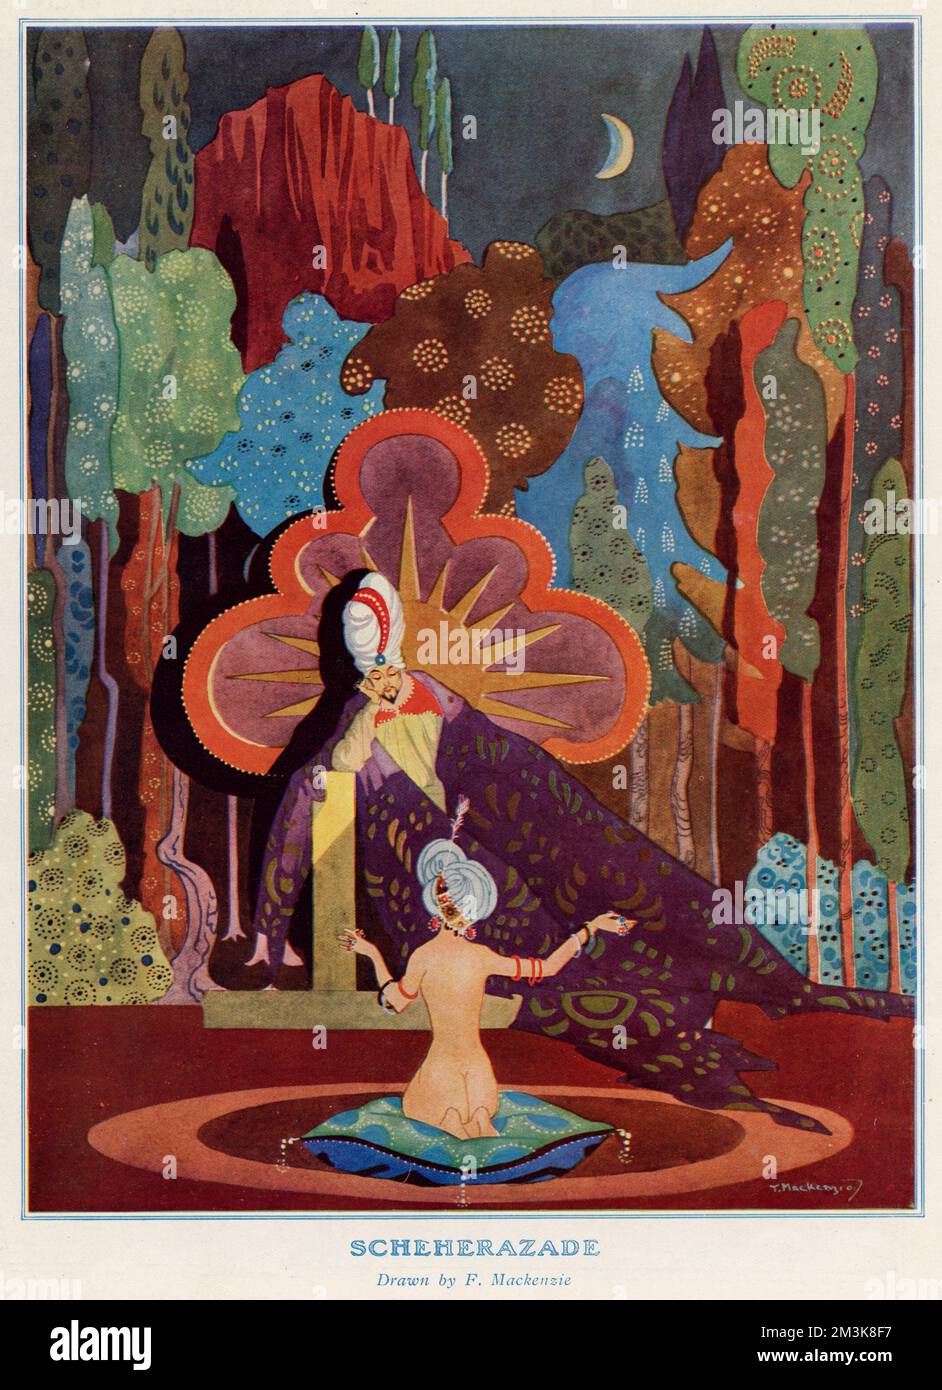 This drawing depicts a scene in the legend of The One Thousand and One Arabian nights. Queen Scheherazade is telling a story to King Shahrayar.     Date: 1927 Stock Photo